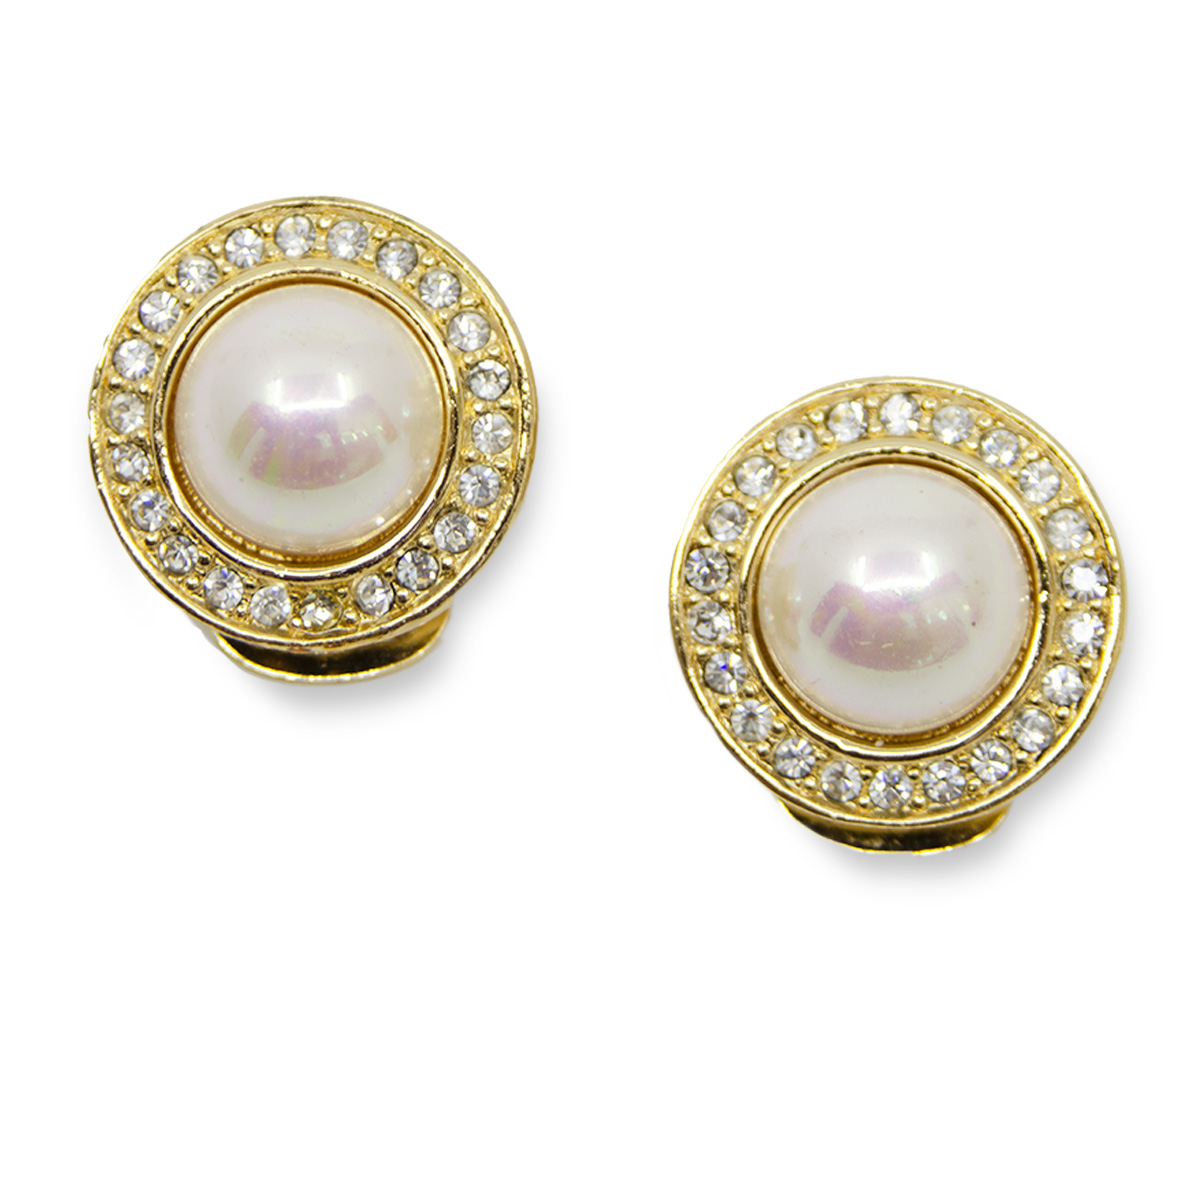 Dior Tribales Earrings Antique GoldFinish Metal with White Resin Pearls   DIOR AU